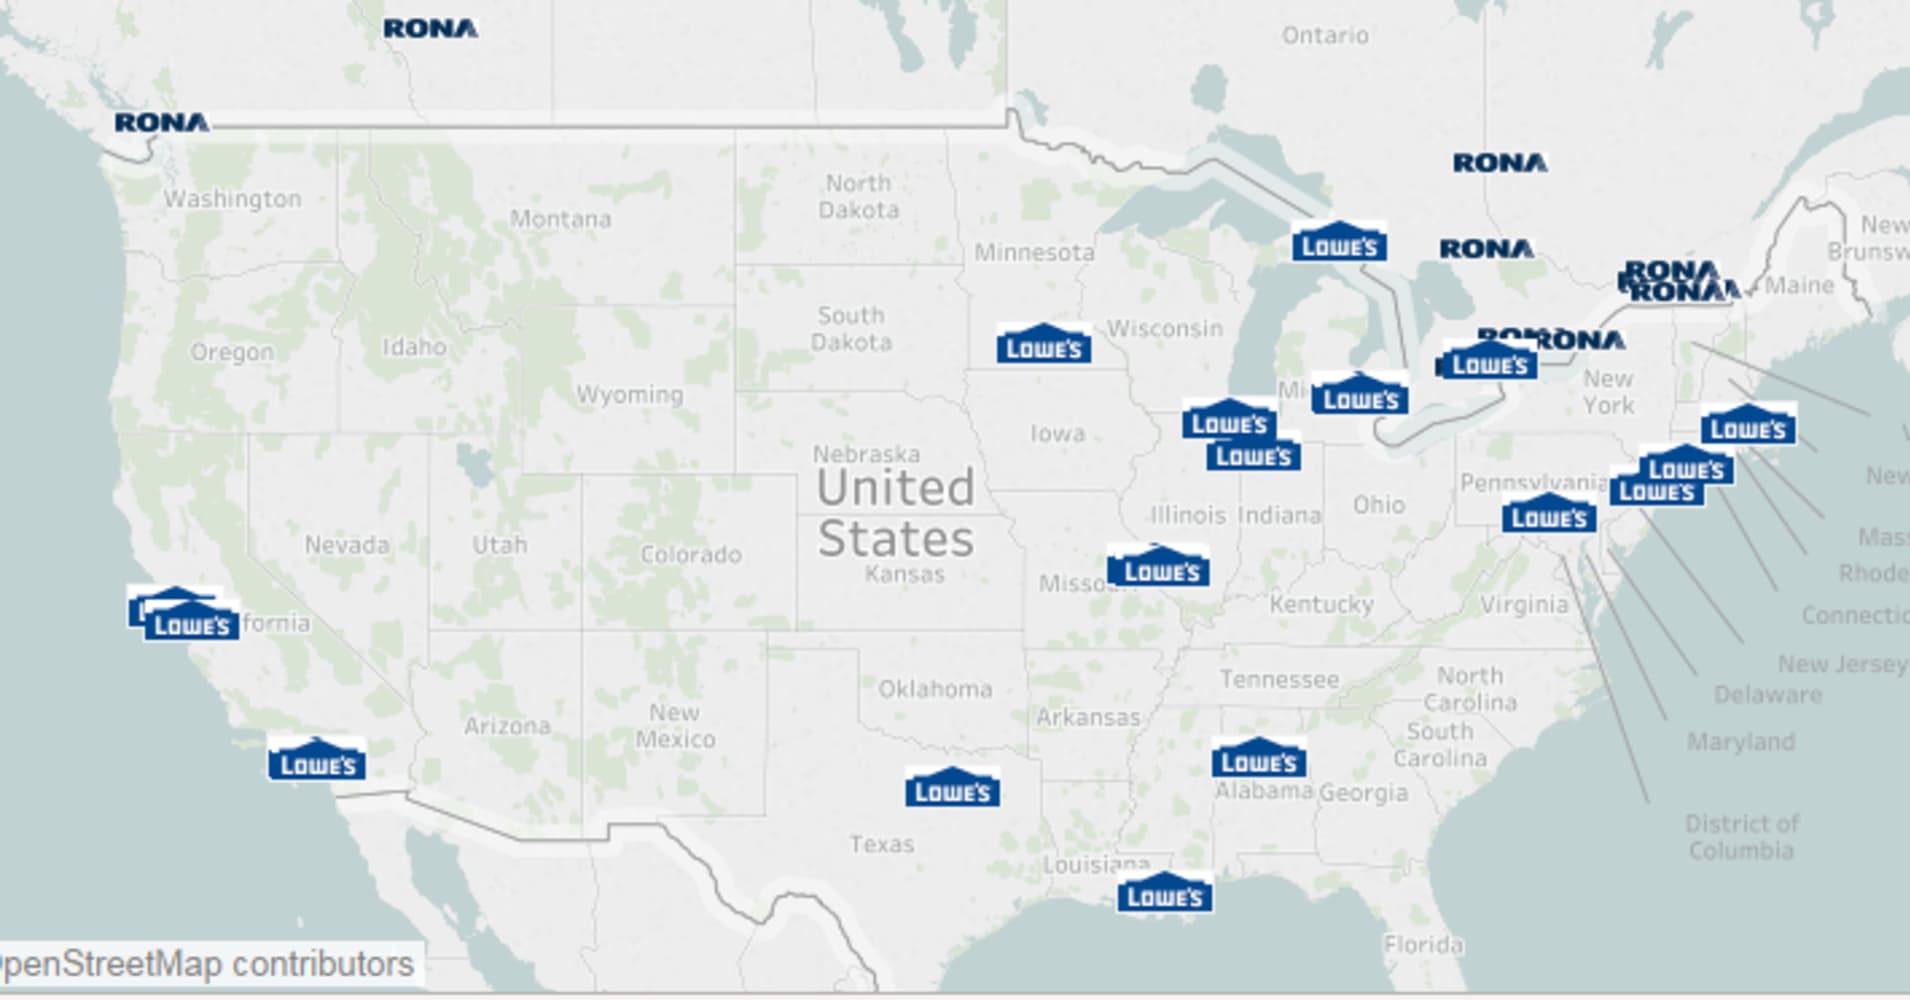 This map shows where Lowe's is closing stores